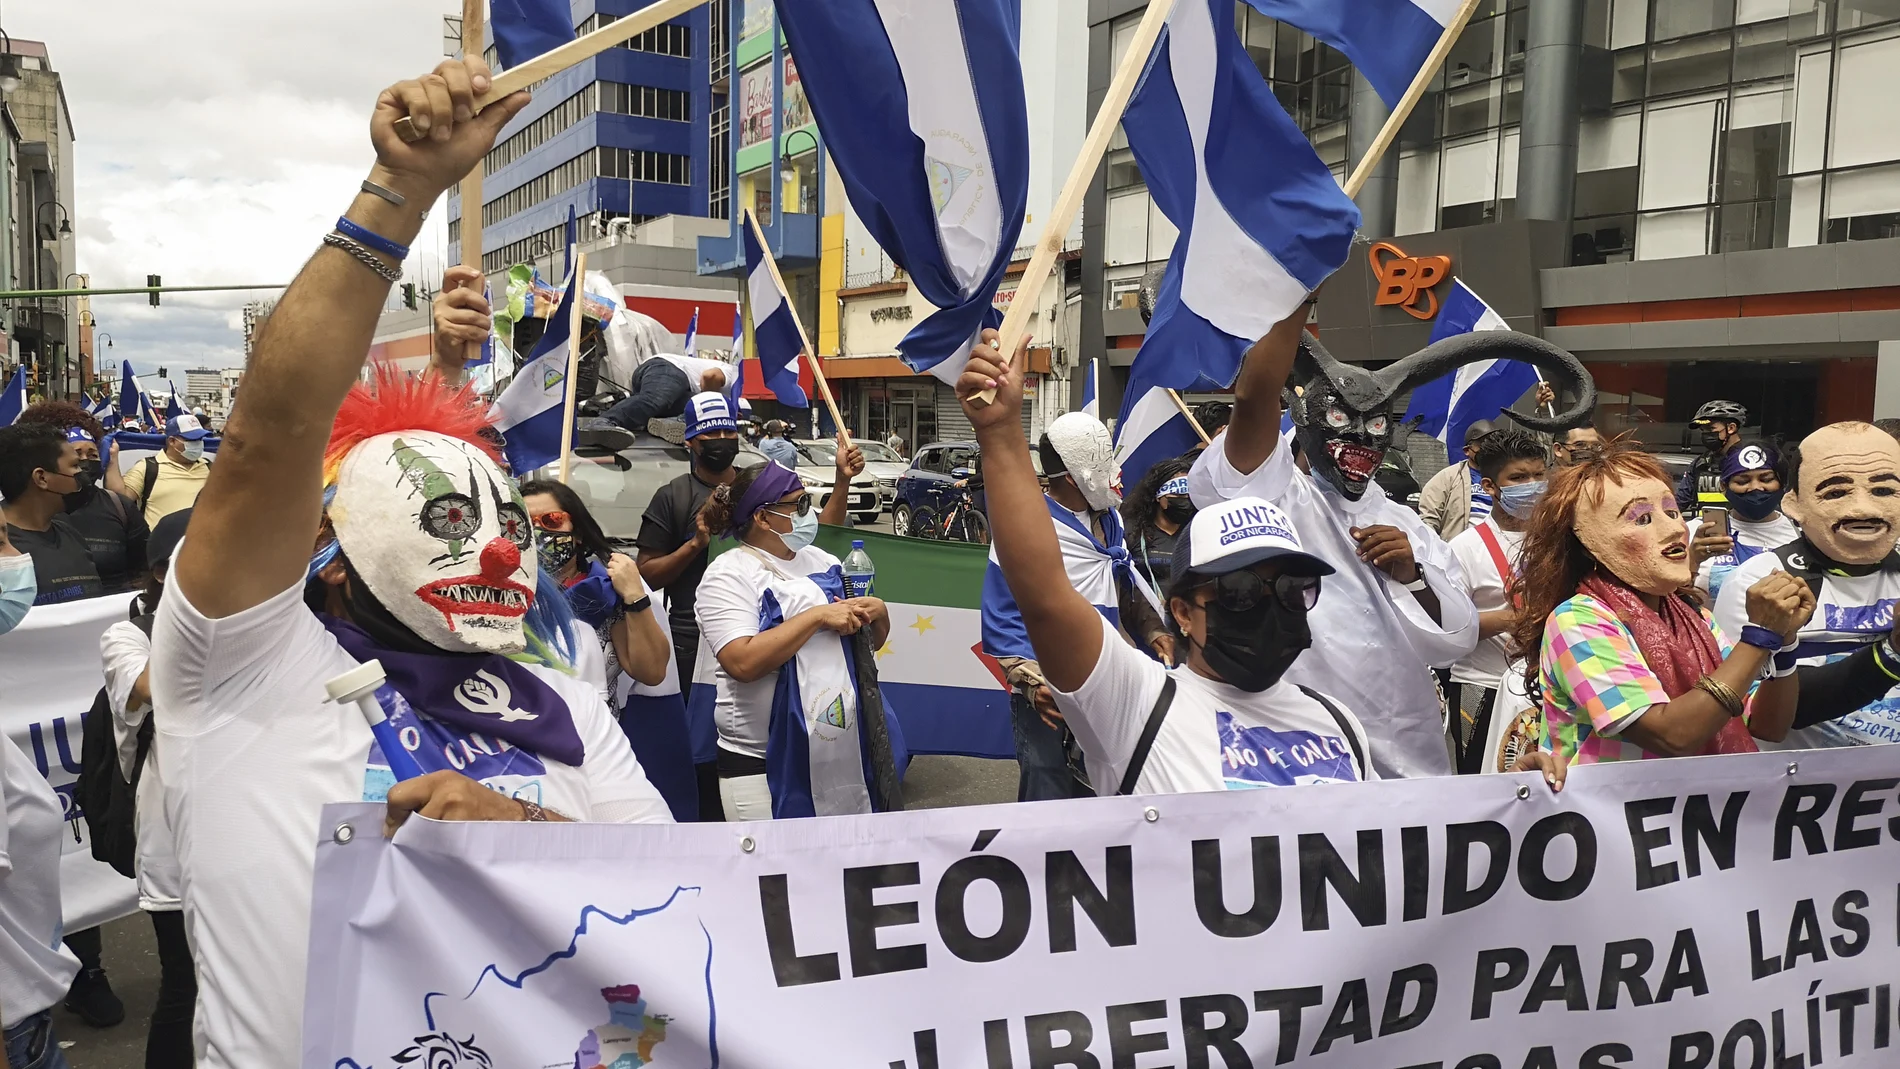 Nicaraguan citizens protest against President Daniel Ortega in San Jose, Costa Rica, Sunday, Nov. 7, 2021. Ortega seeks a fourth consecutive term against a field of little-known candidates while those who could have given him a real challenge sit in jail. (AP Photo/Javier Cordoba)